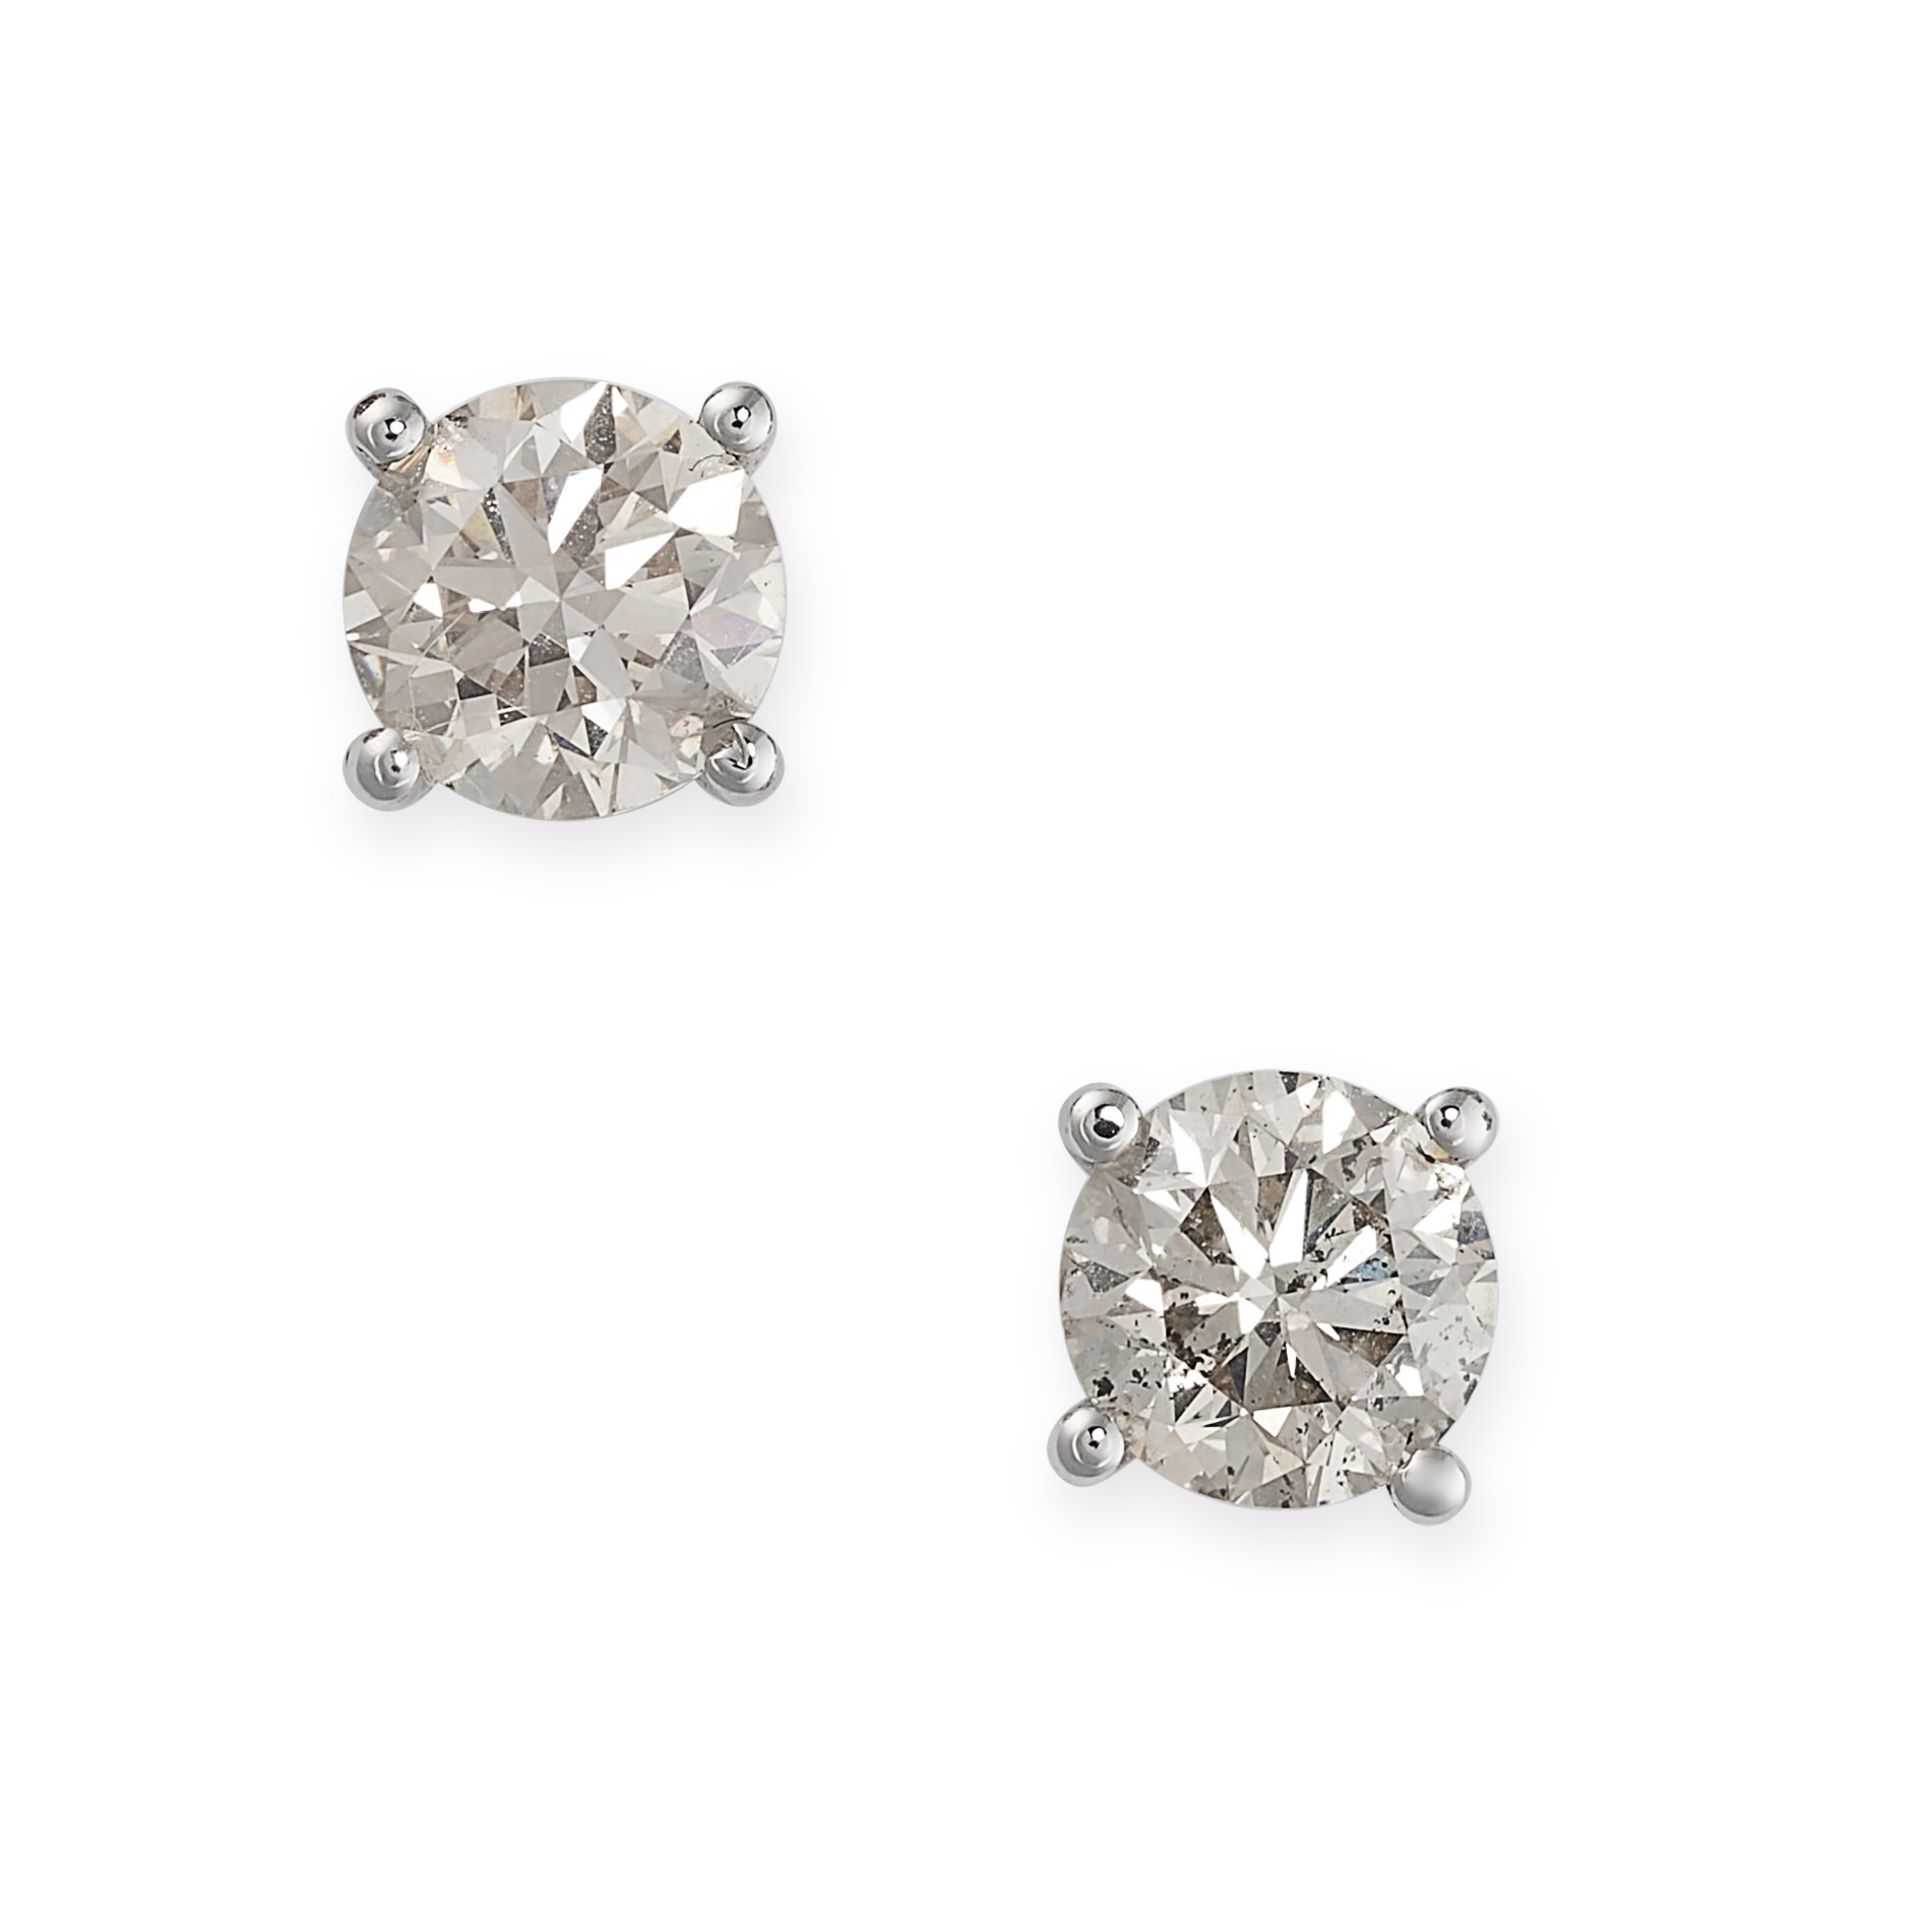 A PAIR OF DIAMOND STUD EARRINGS each set with a round cut diamond, both totalling 1.18 carats,